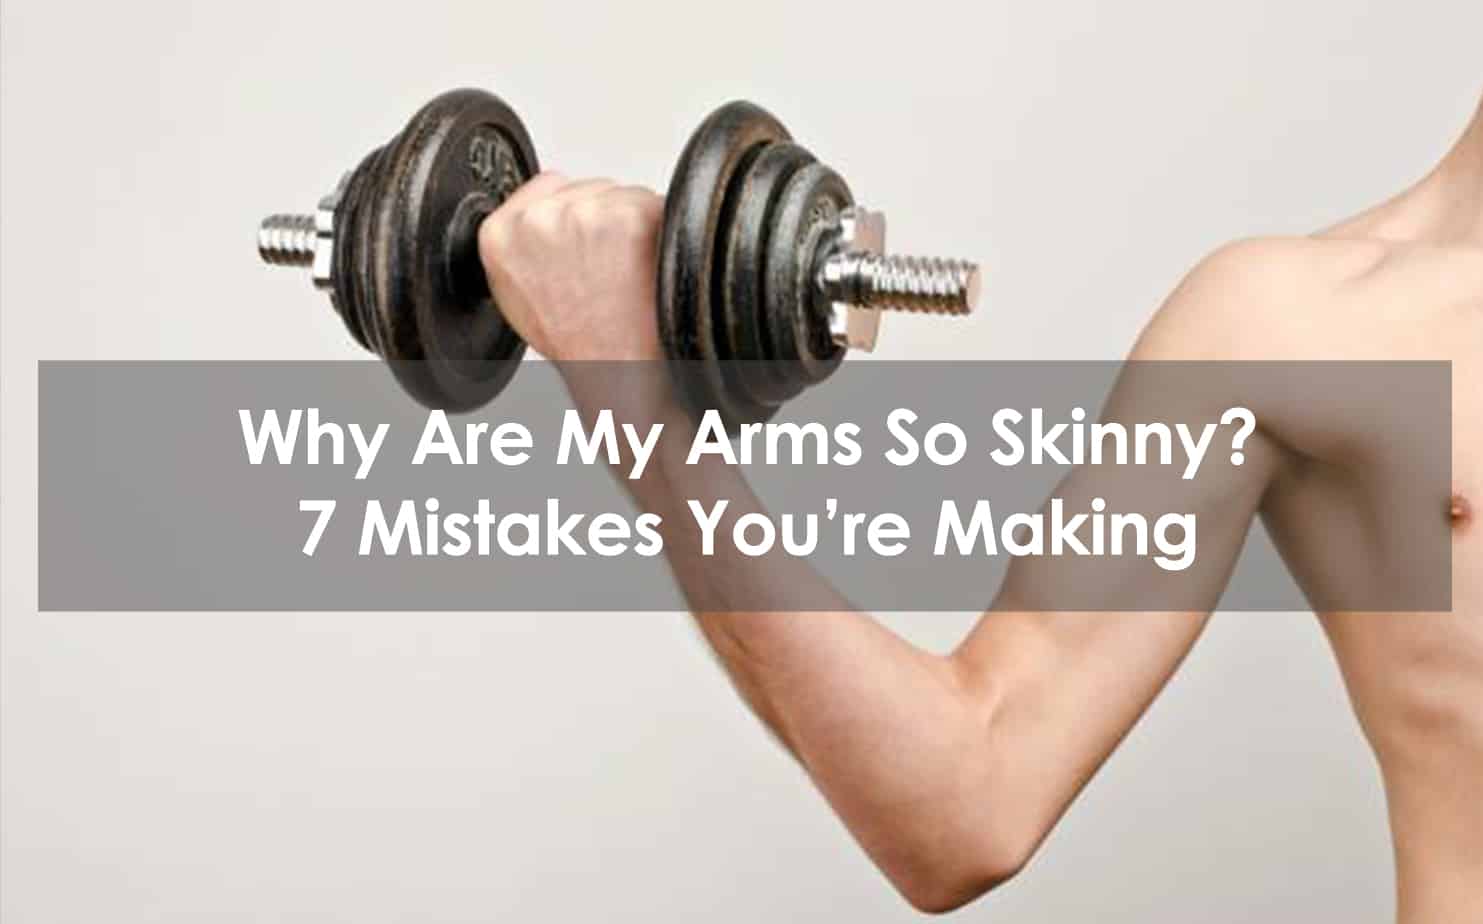 How To Build Up Skinny Arms Plantforce21